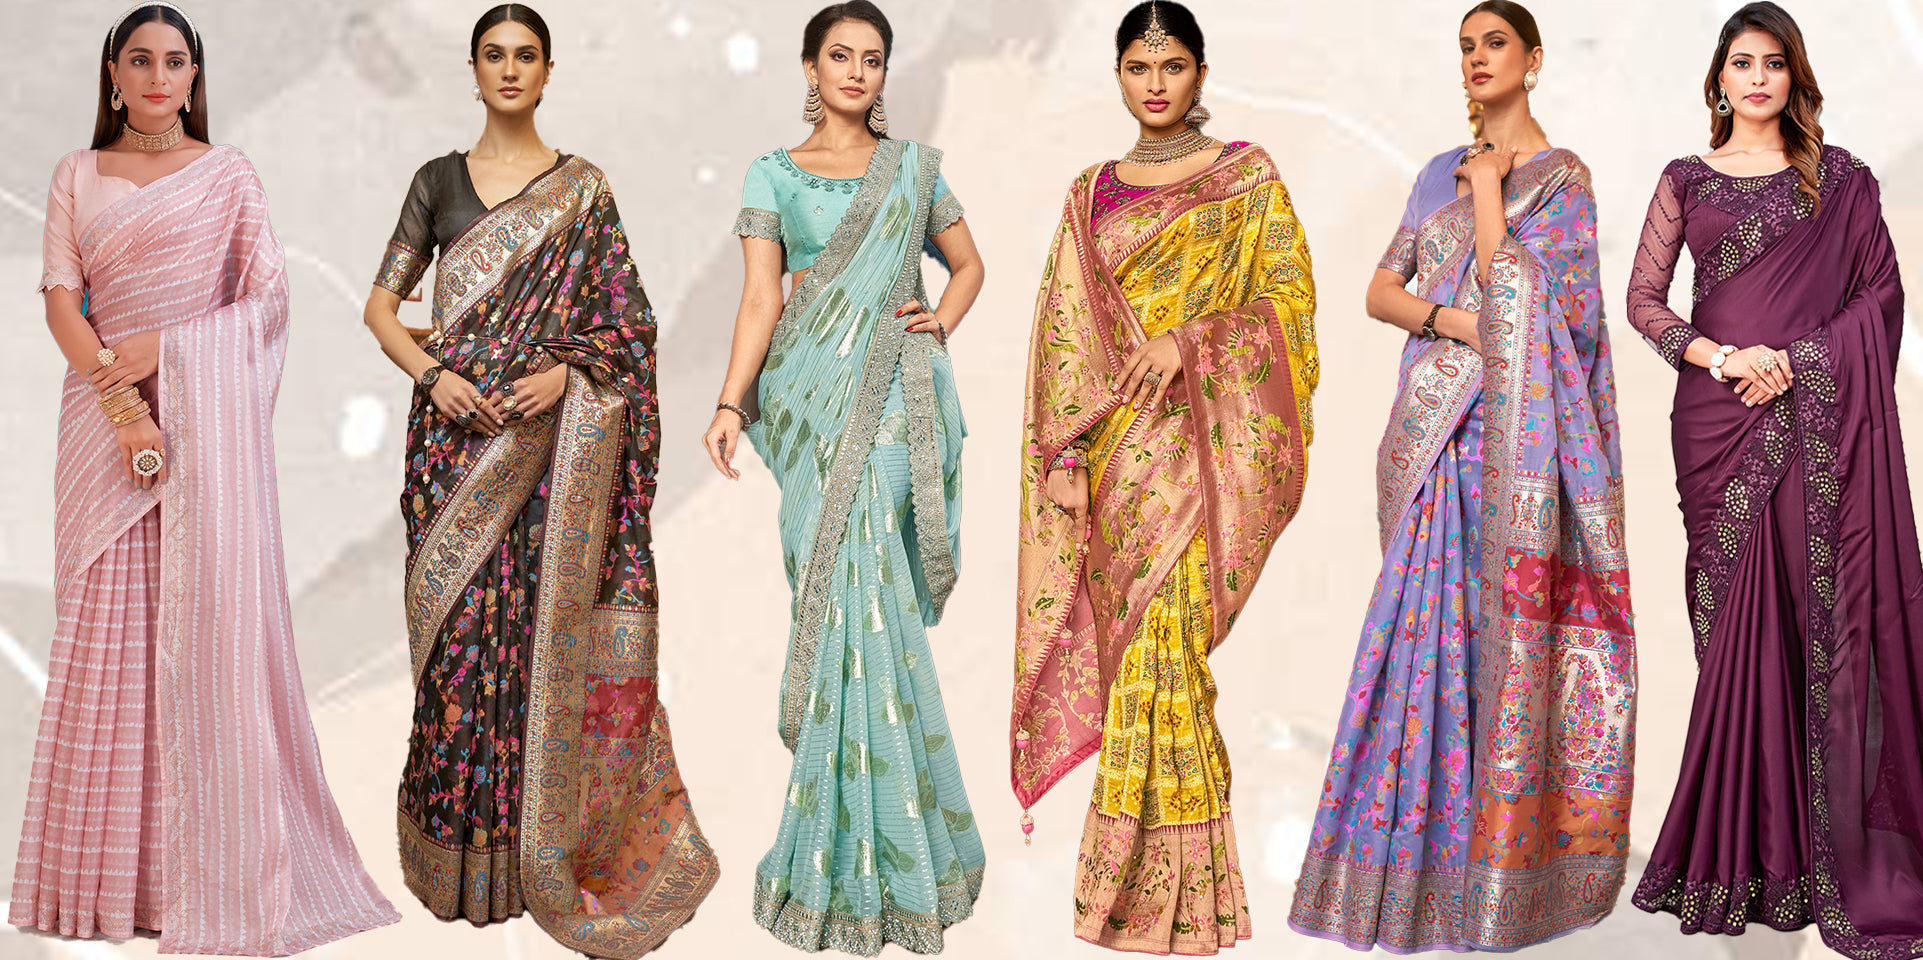 What are the Best Indian Saree Designs for 2022 Diwali Festival